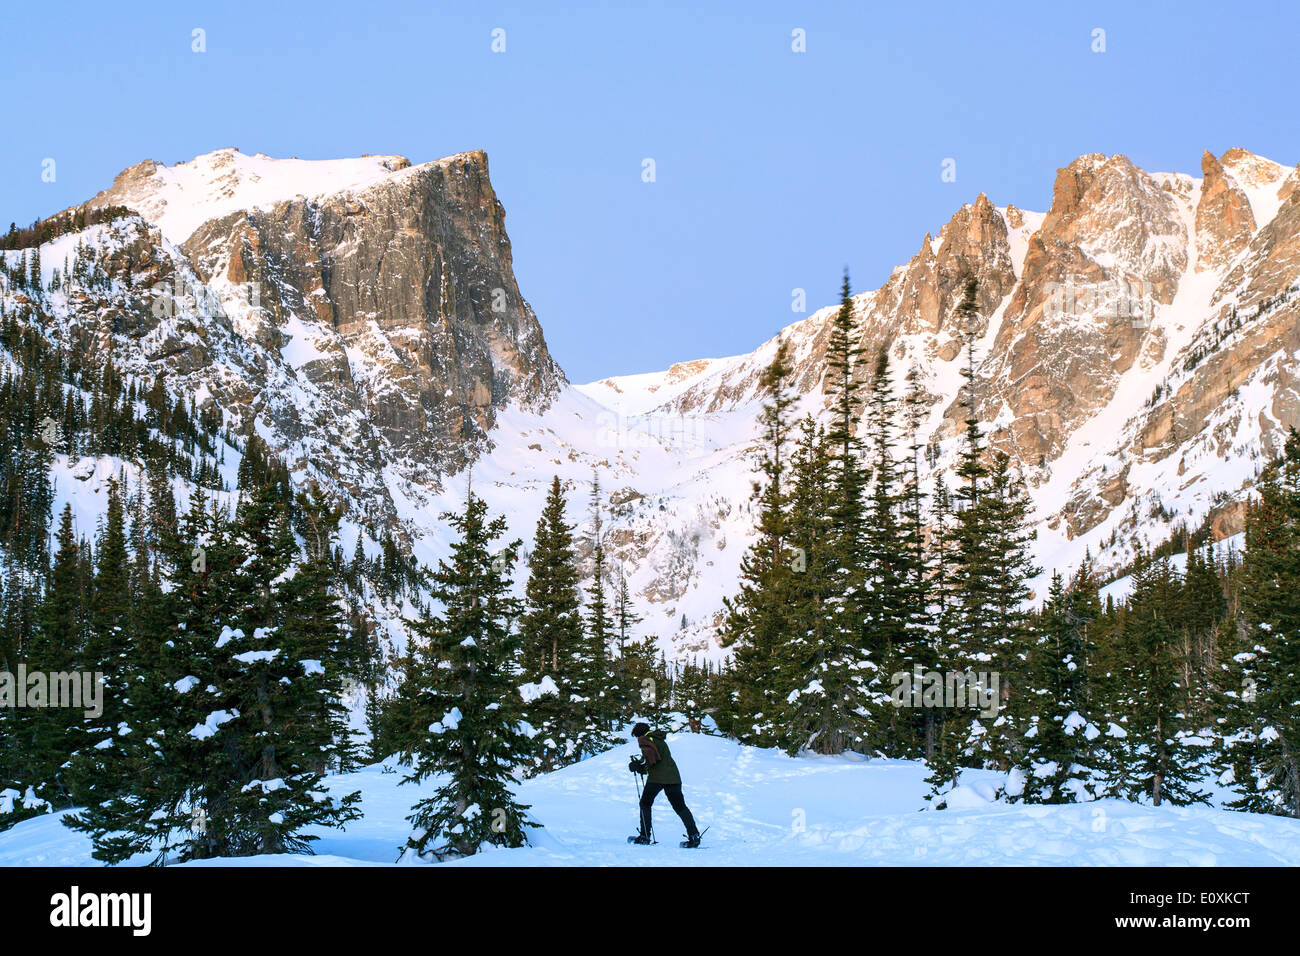 Snowshoer and Hallett Peak (12,713 ft.) in winter, Rocky Mountain National Park, Colorado USA Stock Photo